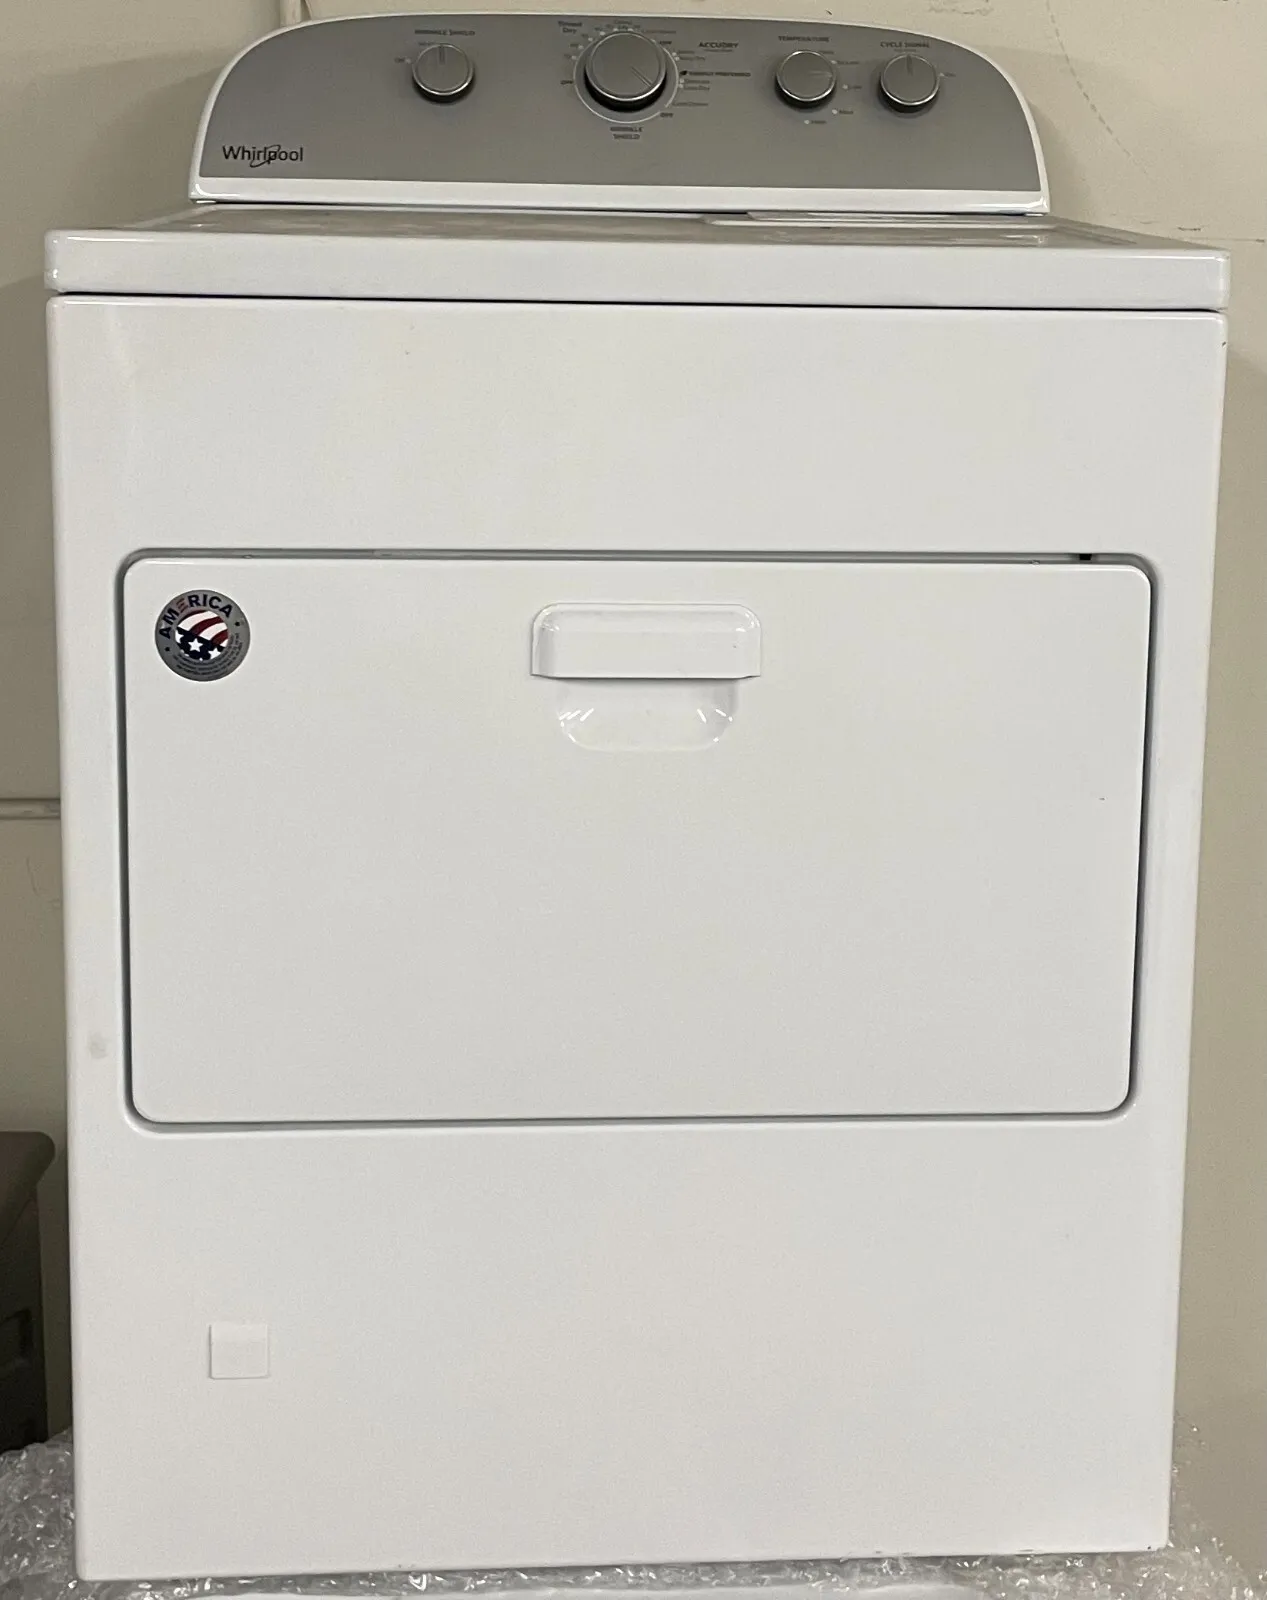 Whirlpool Wgd5000dw 29 Inch Gas Dryer With 7.0 Cu. Ft. Capacity, White